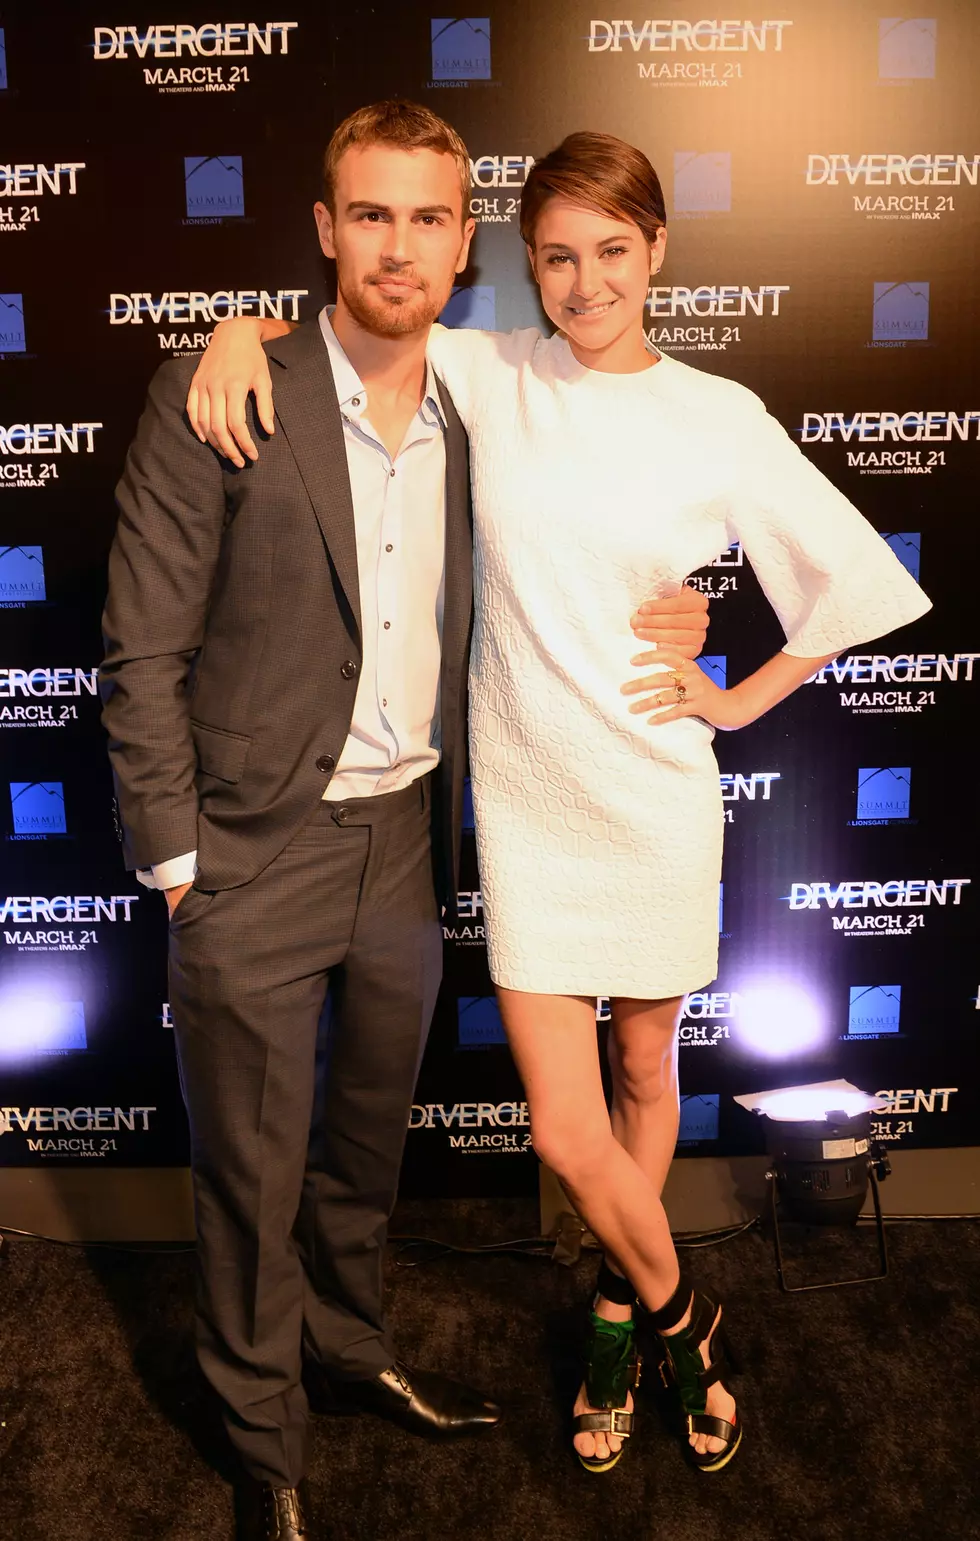 Are You Excited for the Premiere of Divergent?